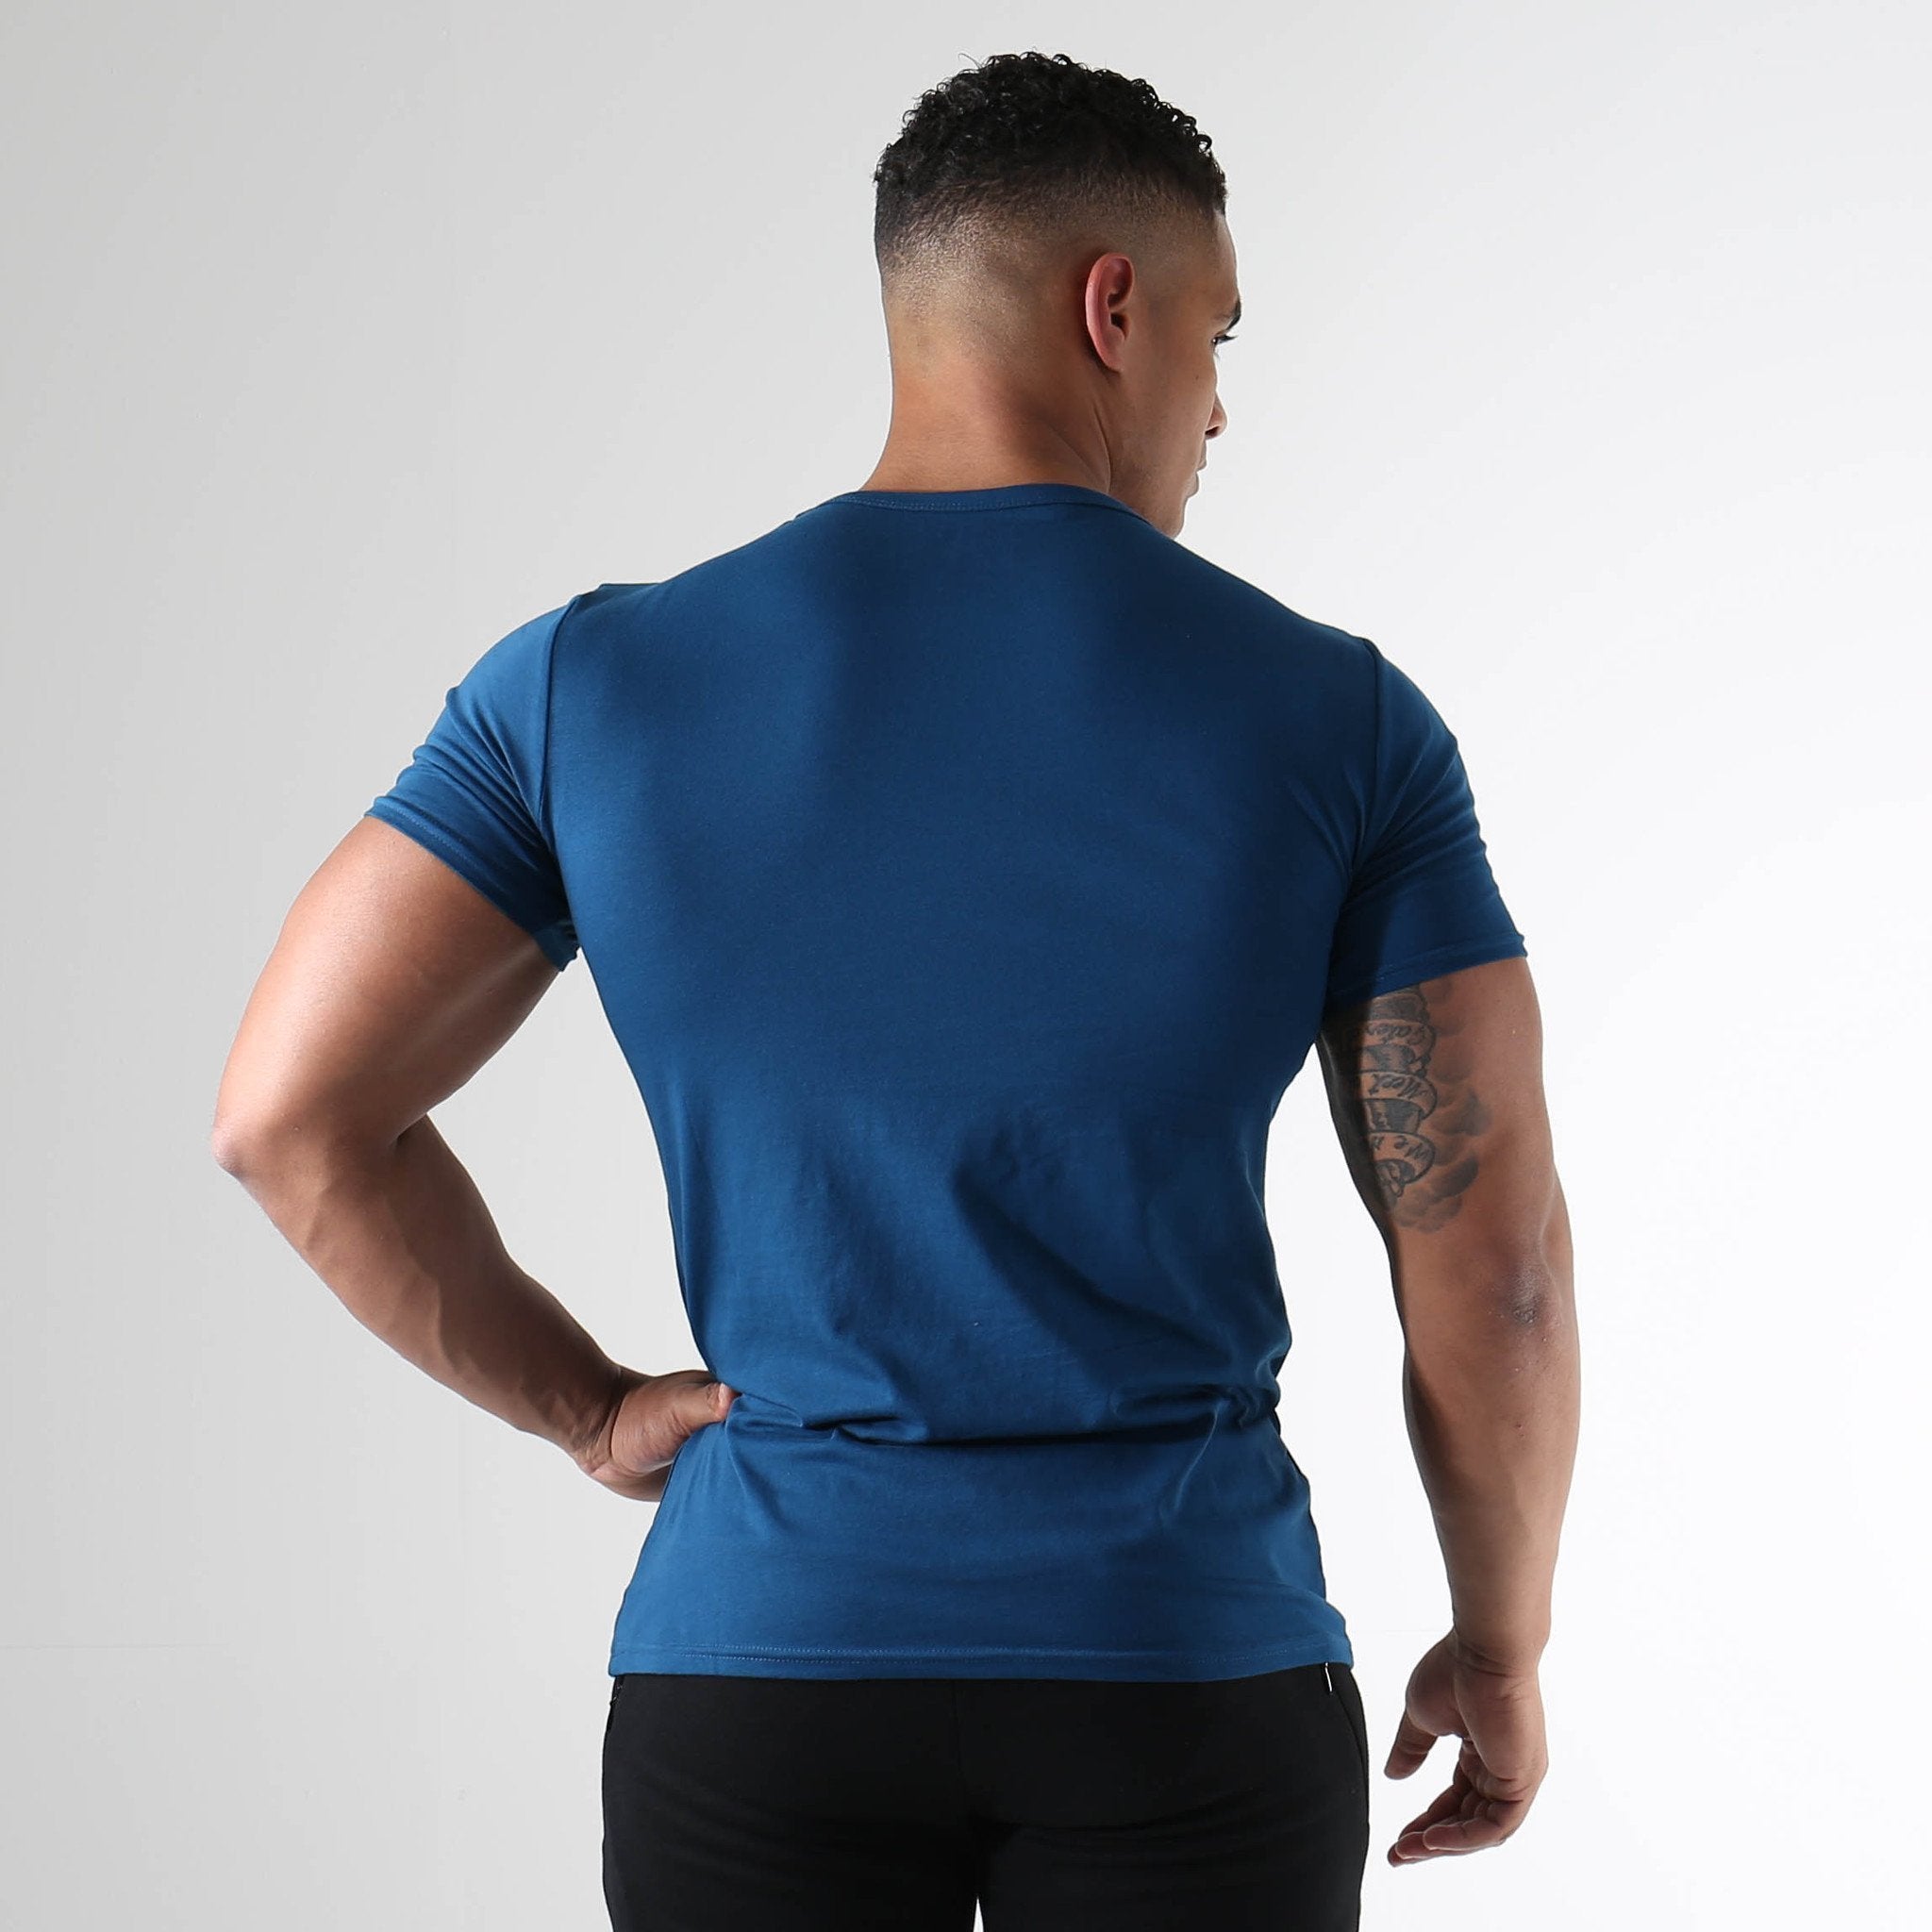 Fitness T-Shirt in Atlantic Blue - view 2